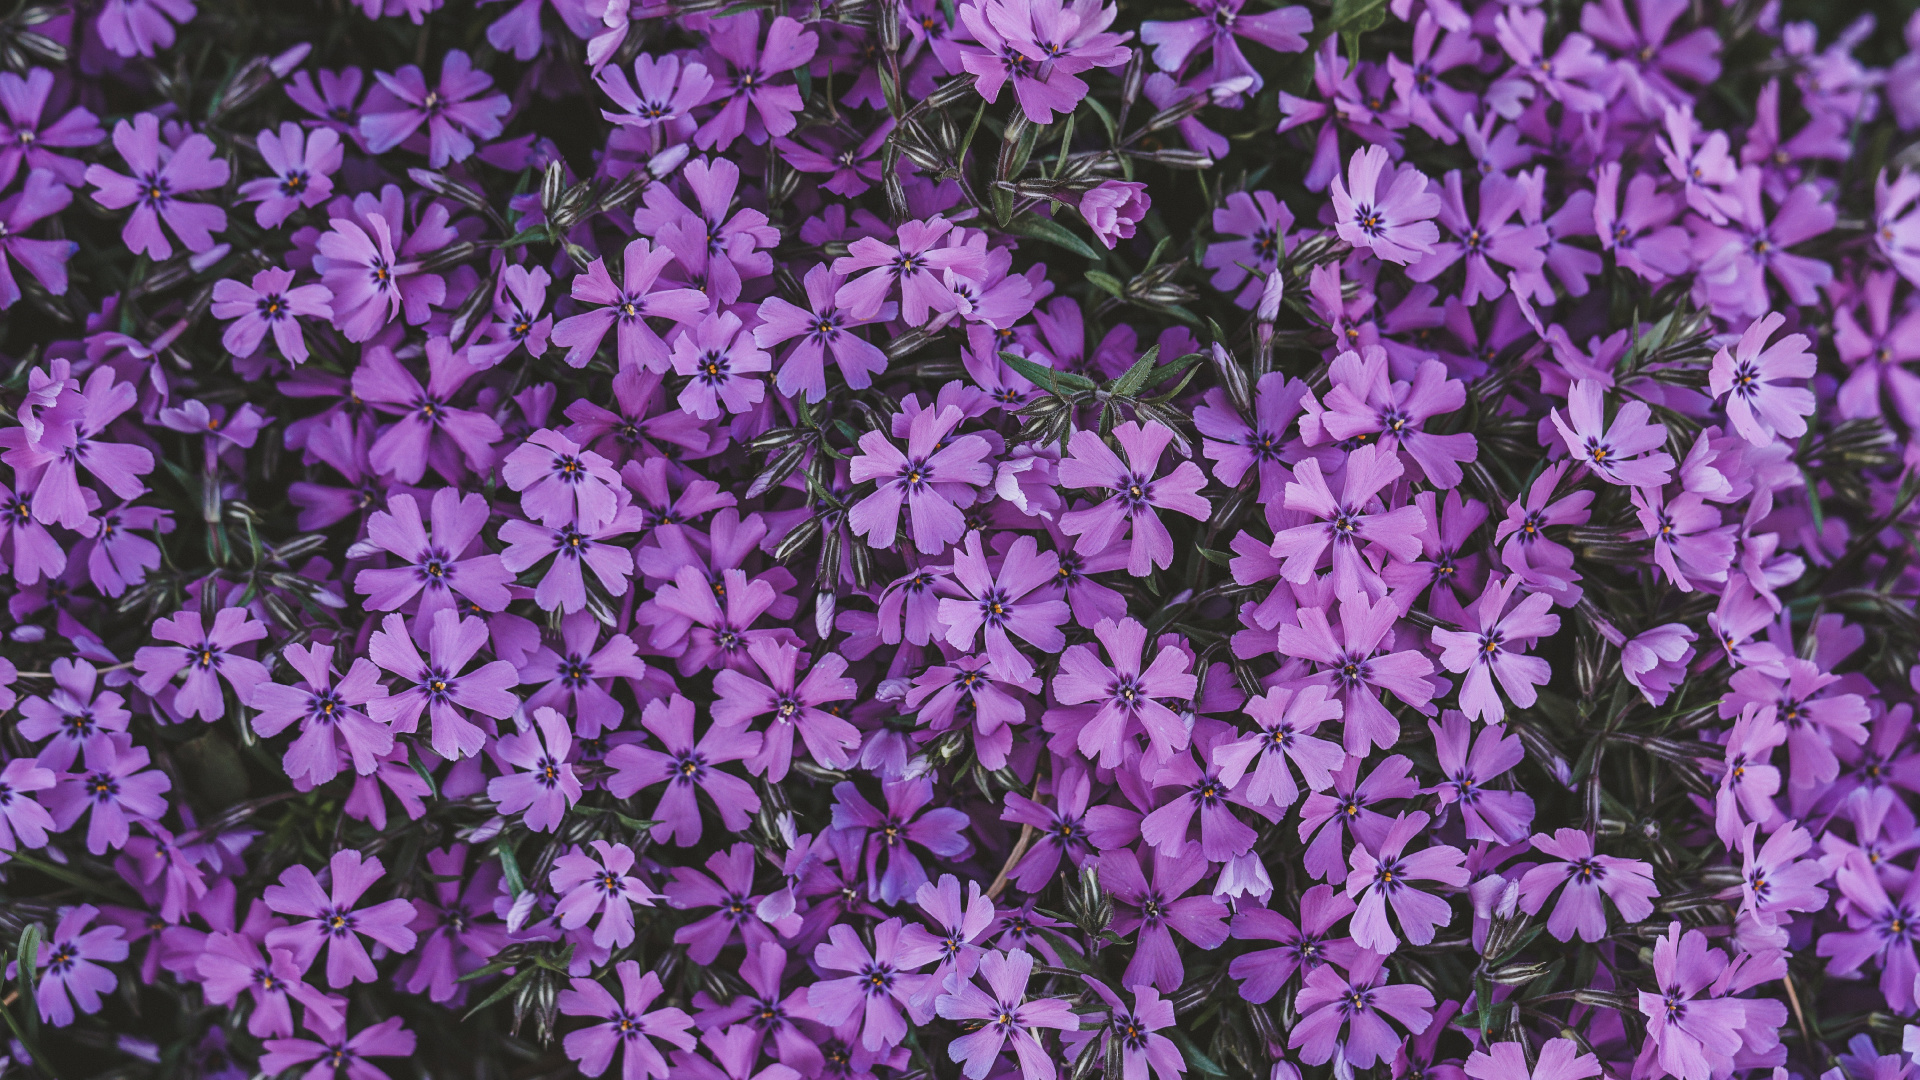 Purple Flowers With Green Leaves. Wallpaper in 1920x1080 Resolution